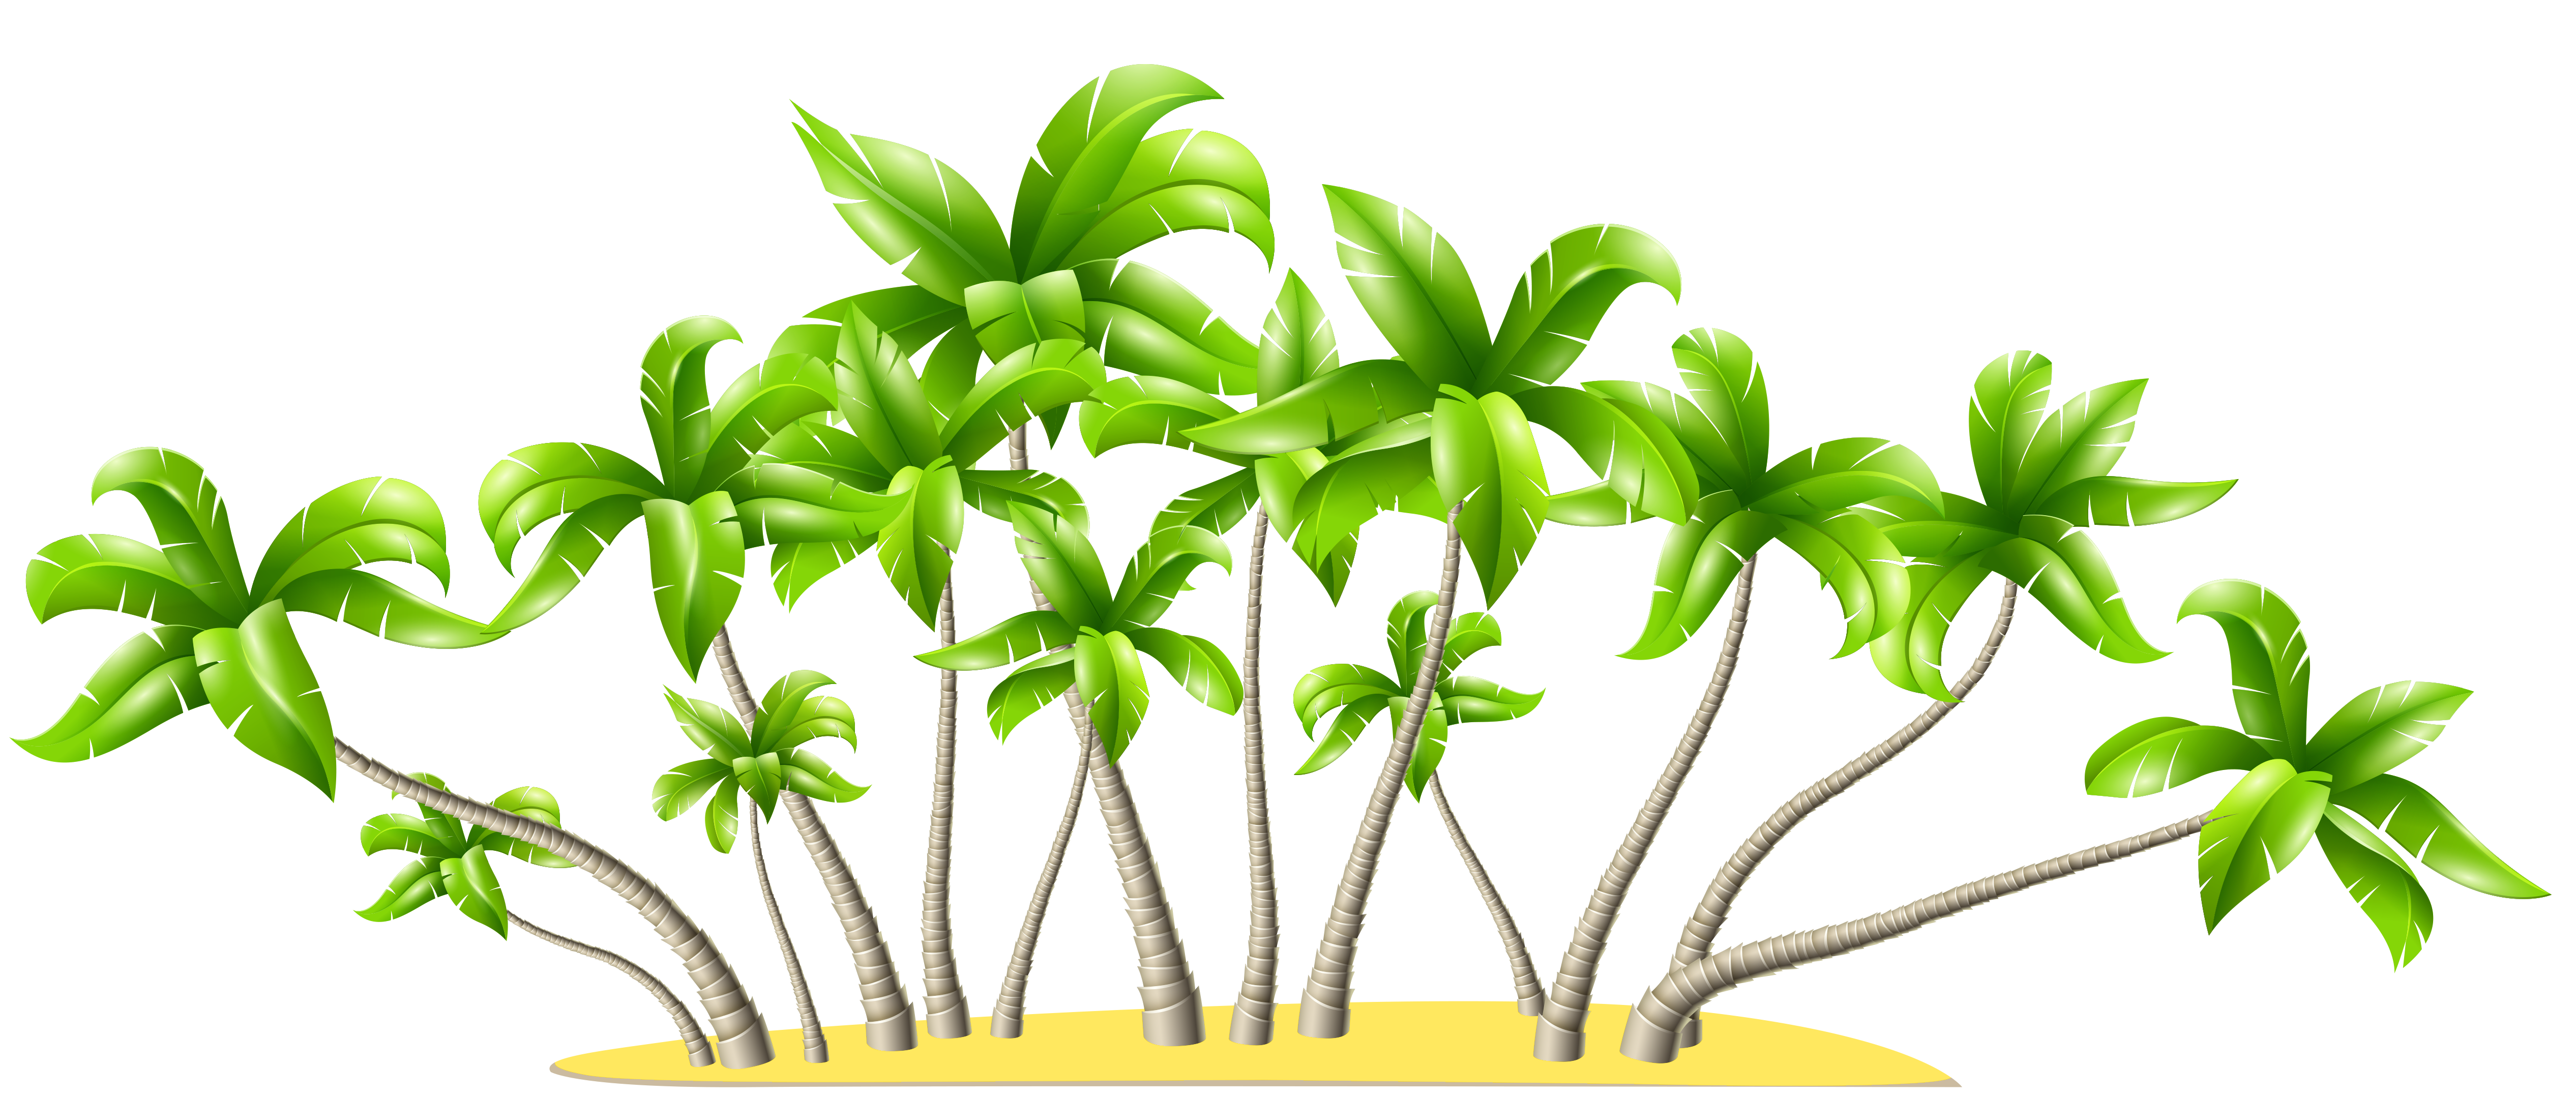 Palm trees clipart